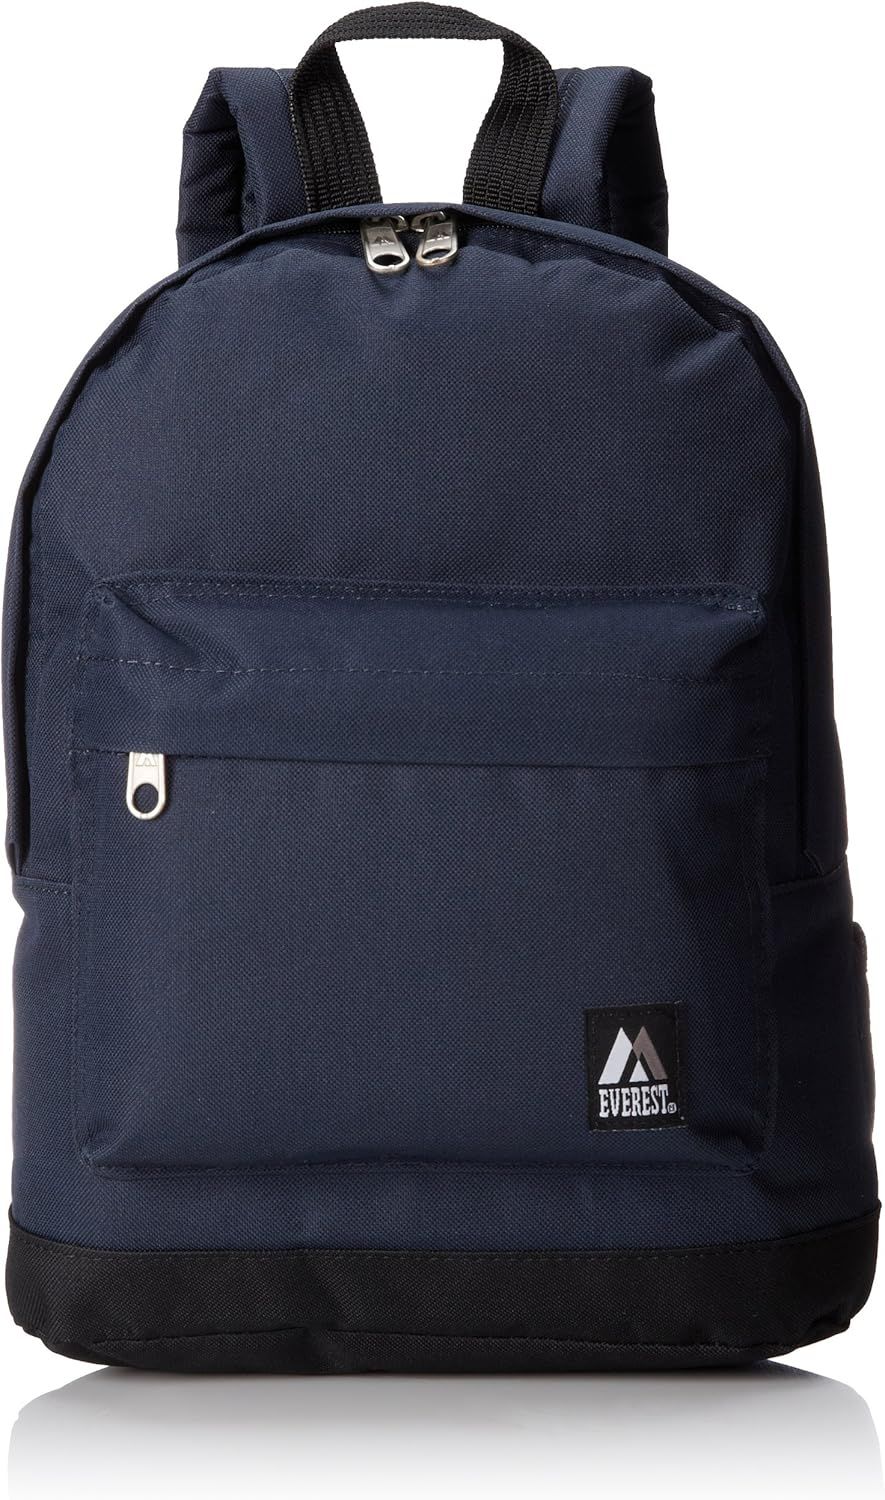 Everest Small Backpack, Navy, One Size | Amazon (US)